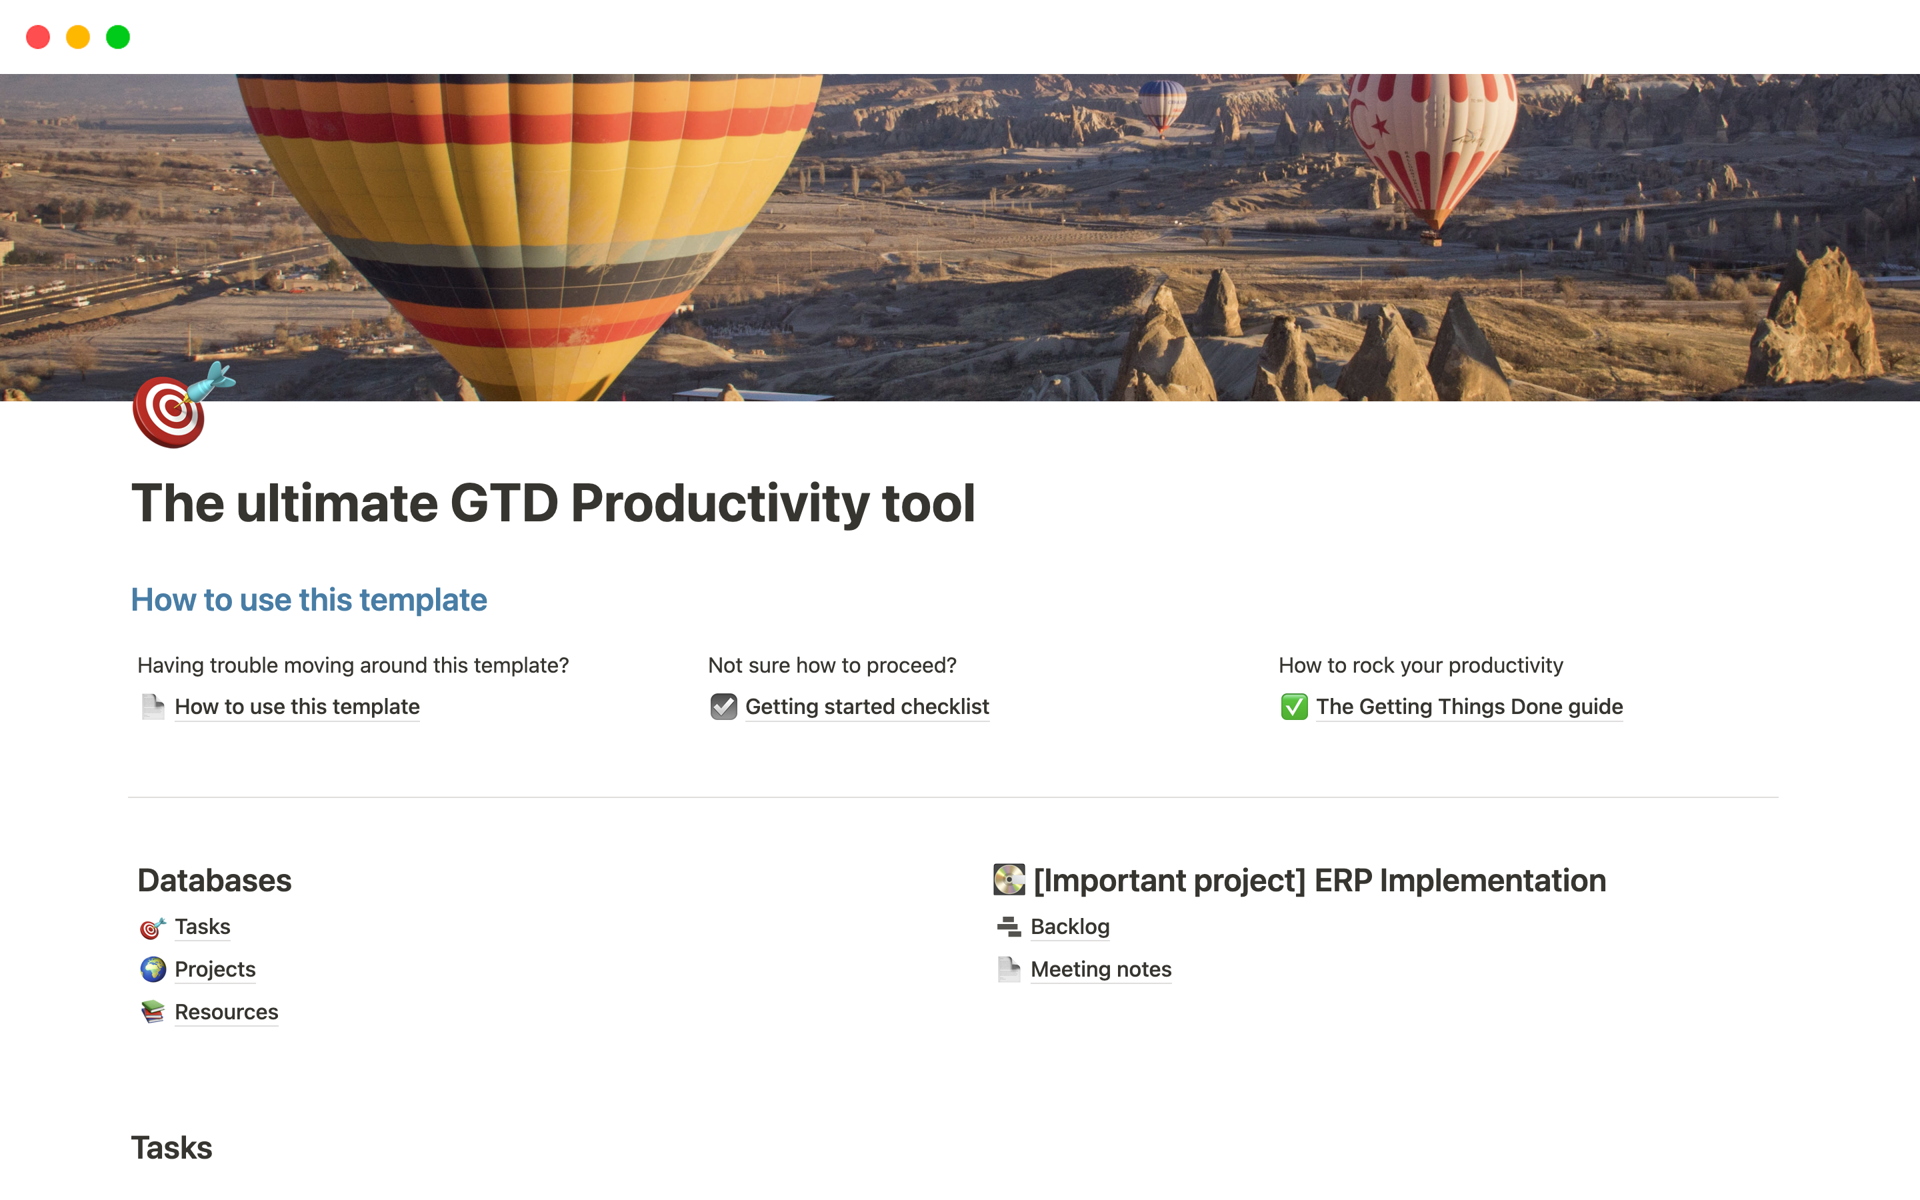 A minimal and effective GTD template for personal productivity, together with a full GTD guide